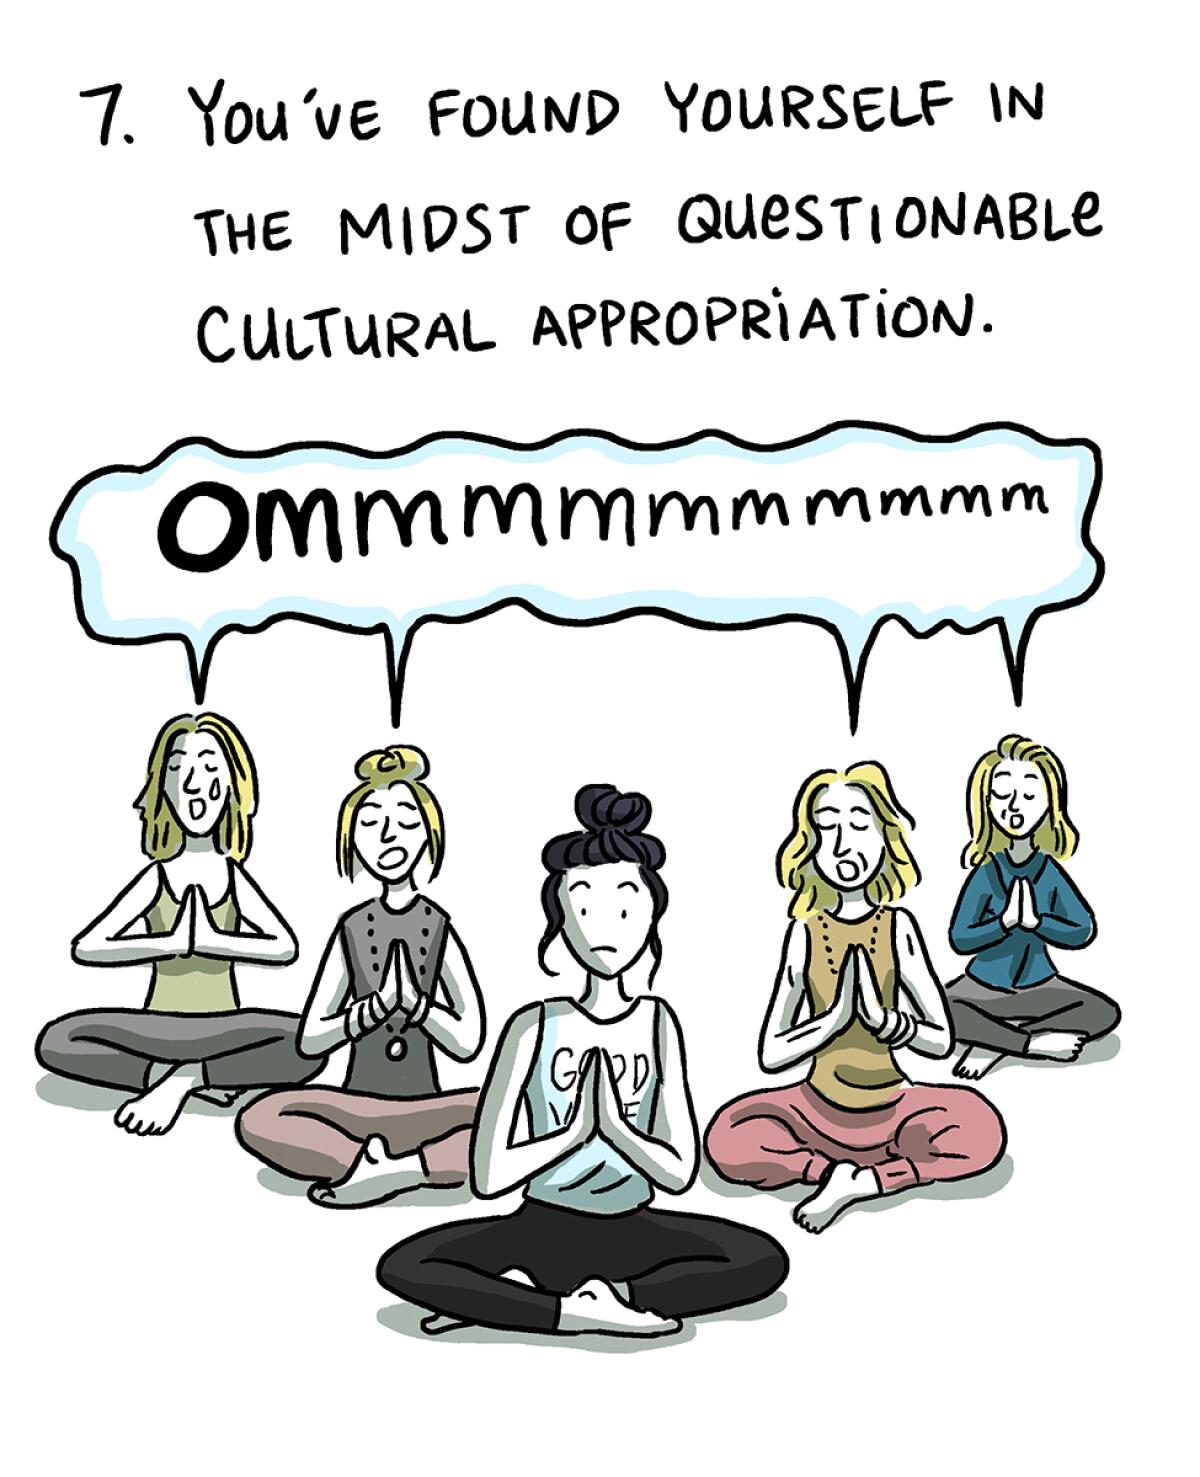 "7 You've found yourself in midst of questionable cultural appropriation" with people doing yoga saying "Ommm"